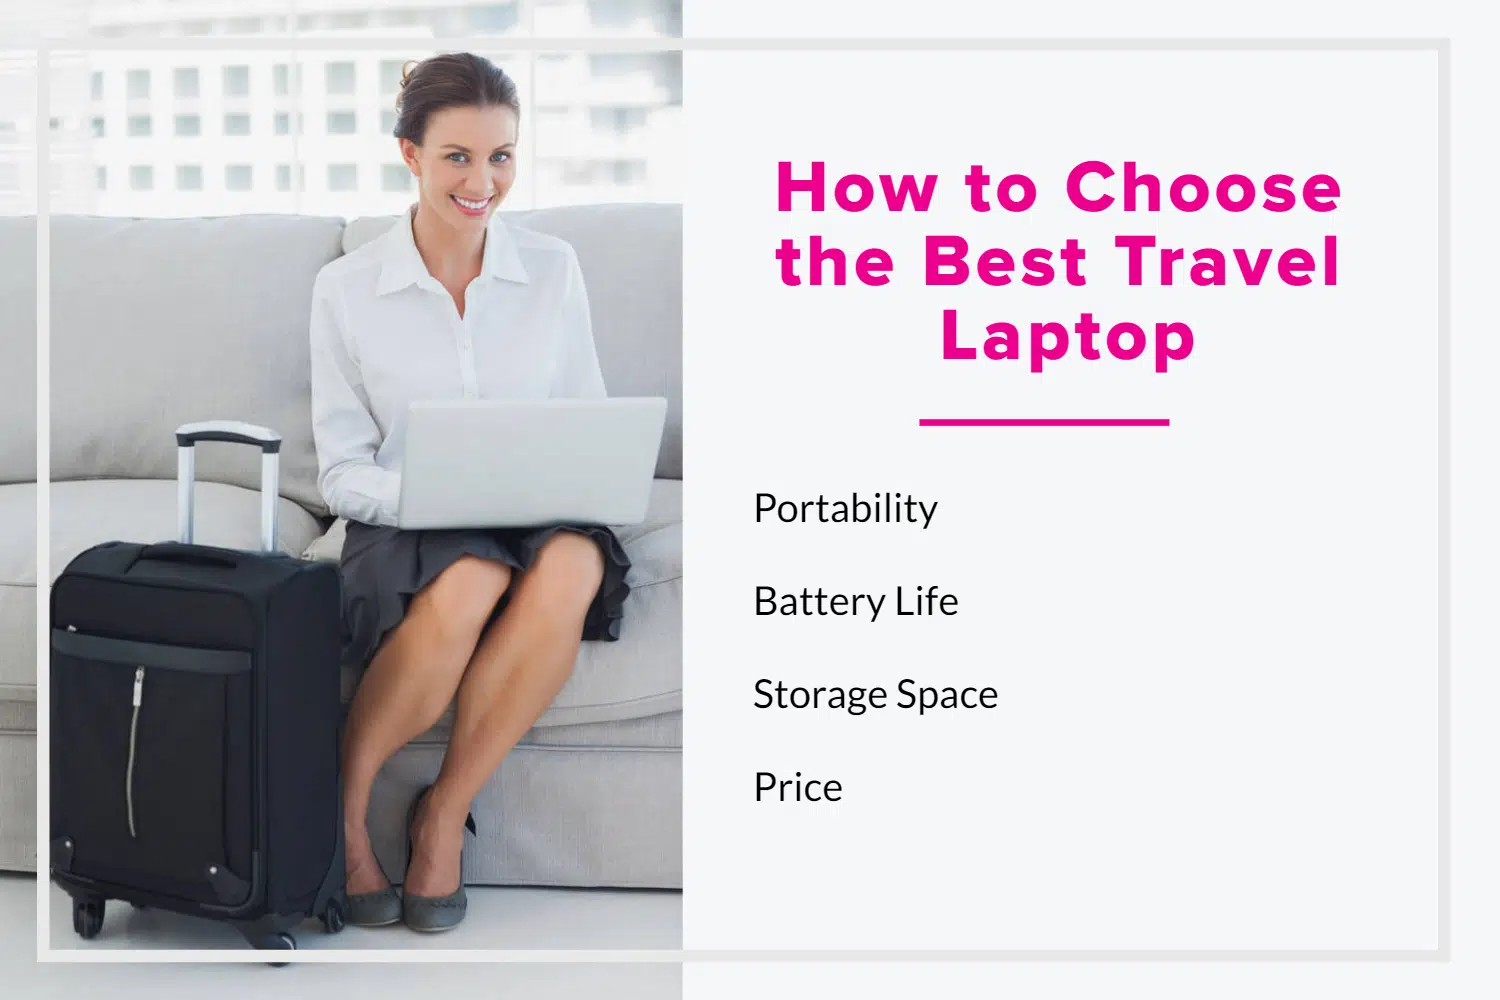 How to Choose the Best Travel Laptop